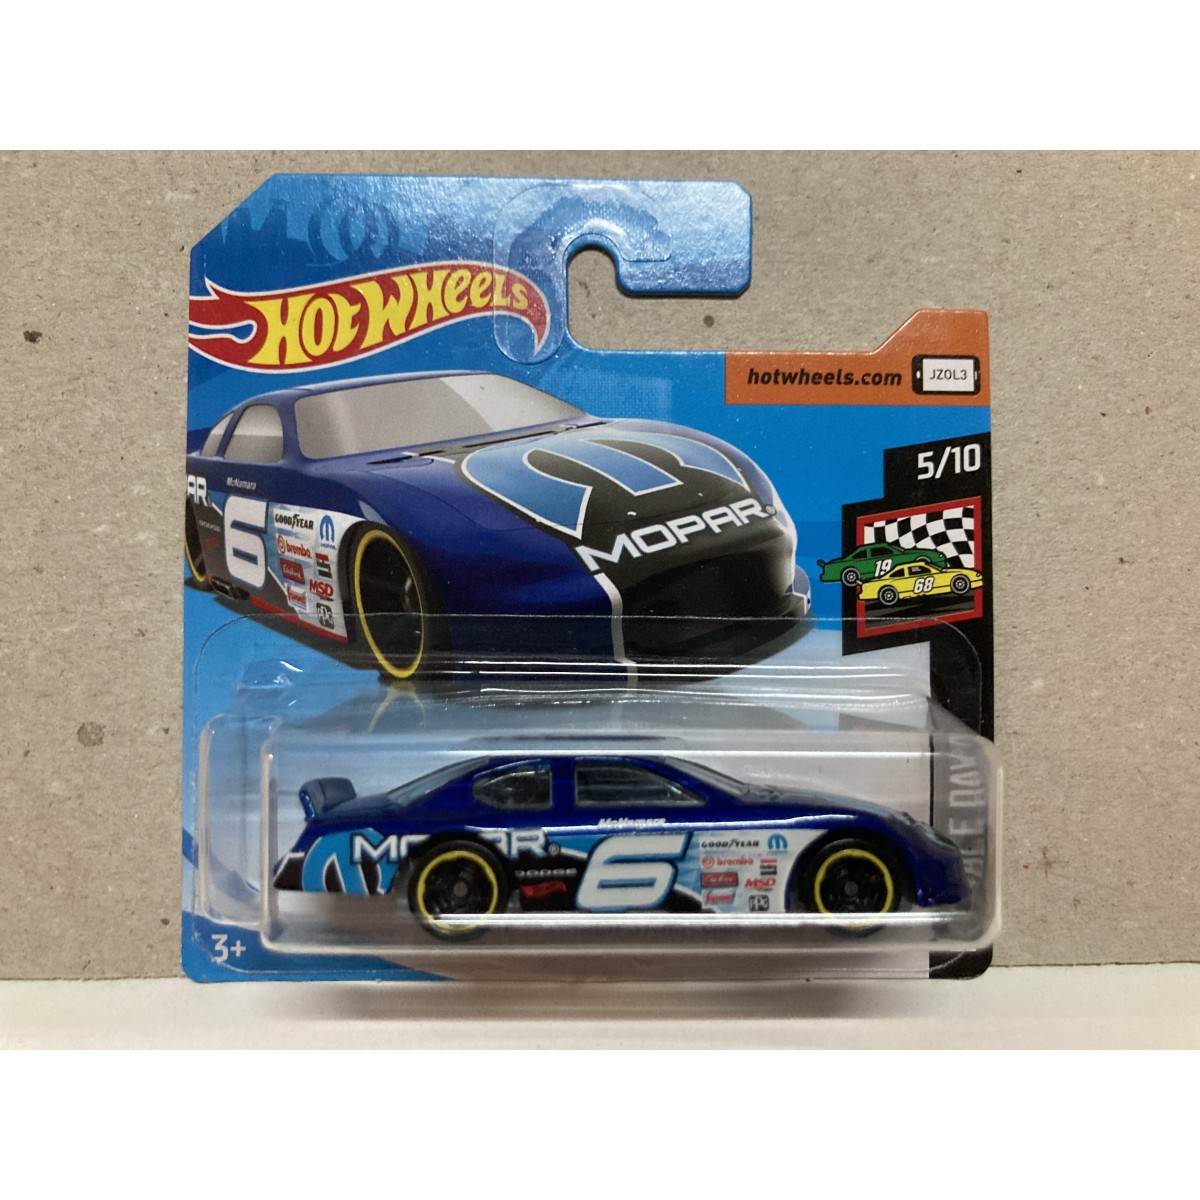 DODGE CHARGER STOCK CARS 1:64 HOT WHEELS - BCN STOCK CARS